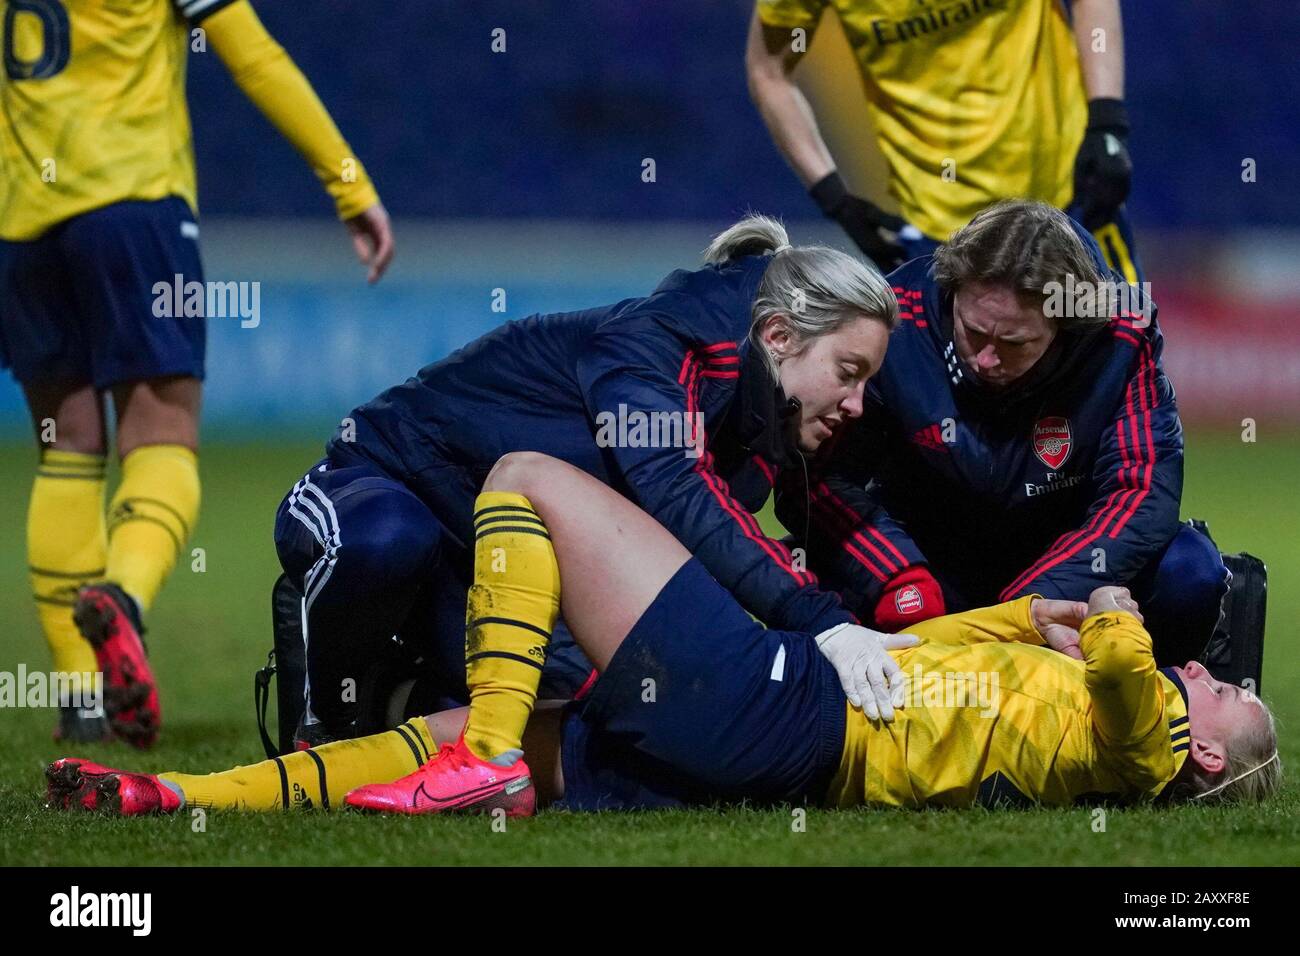 CHESTER. ENGLAND. FEB 13th: Beth Mead of Arsenal on the ground after a hard tackle  during the Women’s Super League game between Liverpool Women and Arsenal Women at The Deva Stadium in Chester, England. (Photo by Daniela Porcelli/SPP) Stock Photo